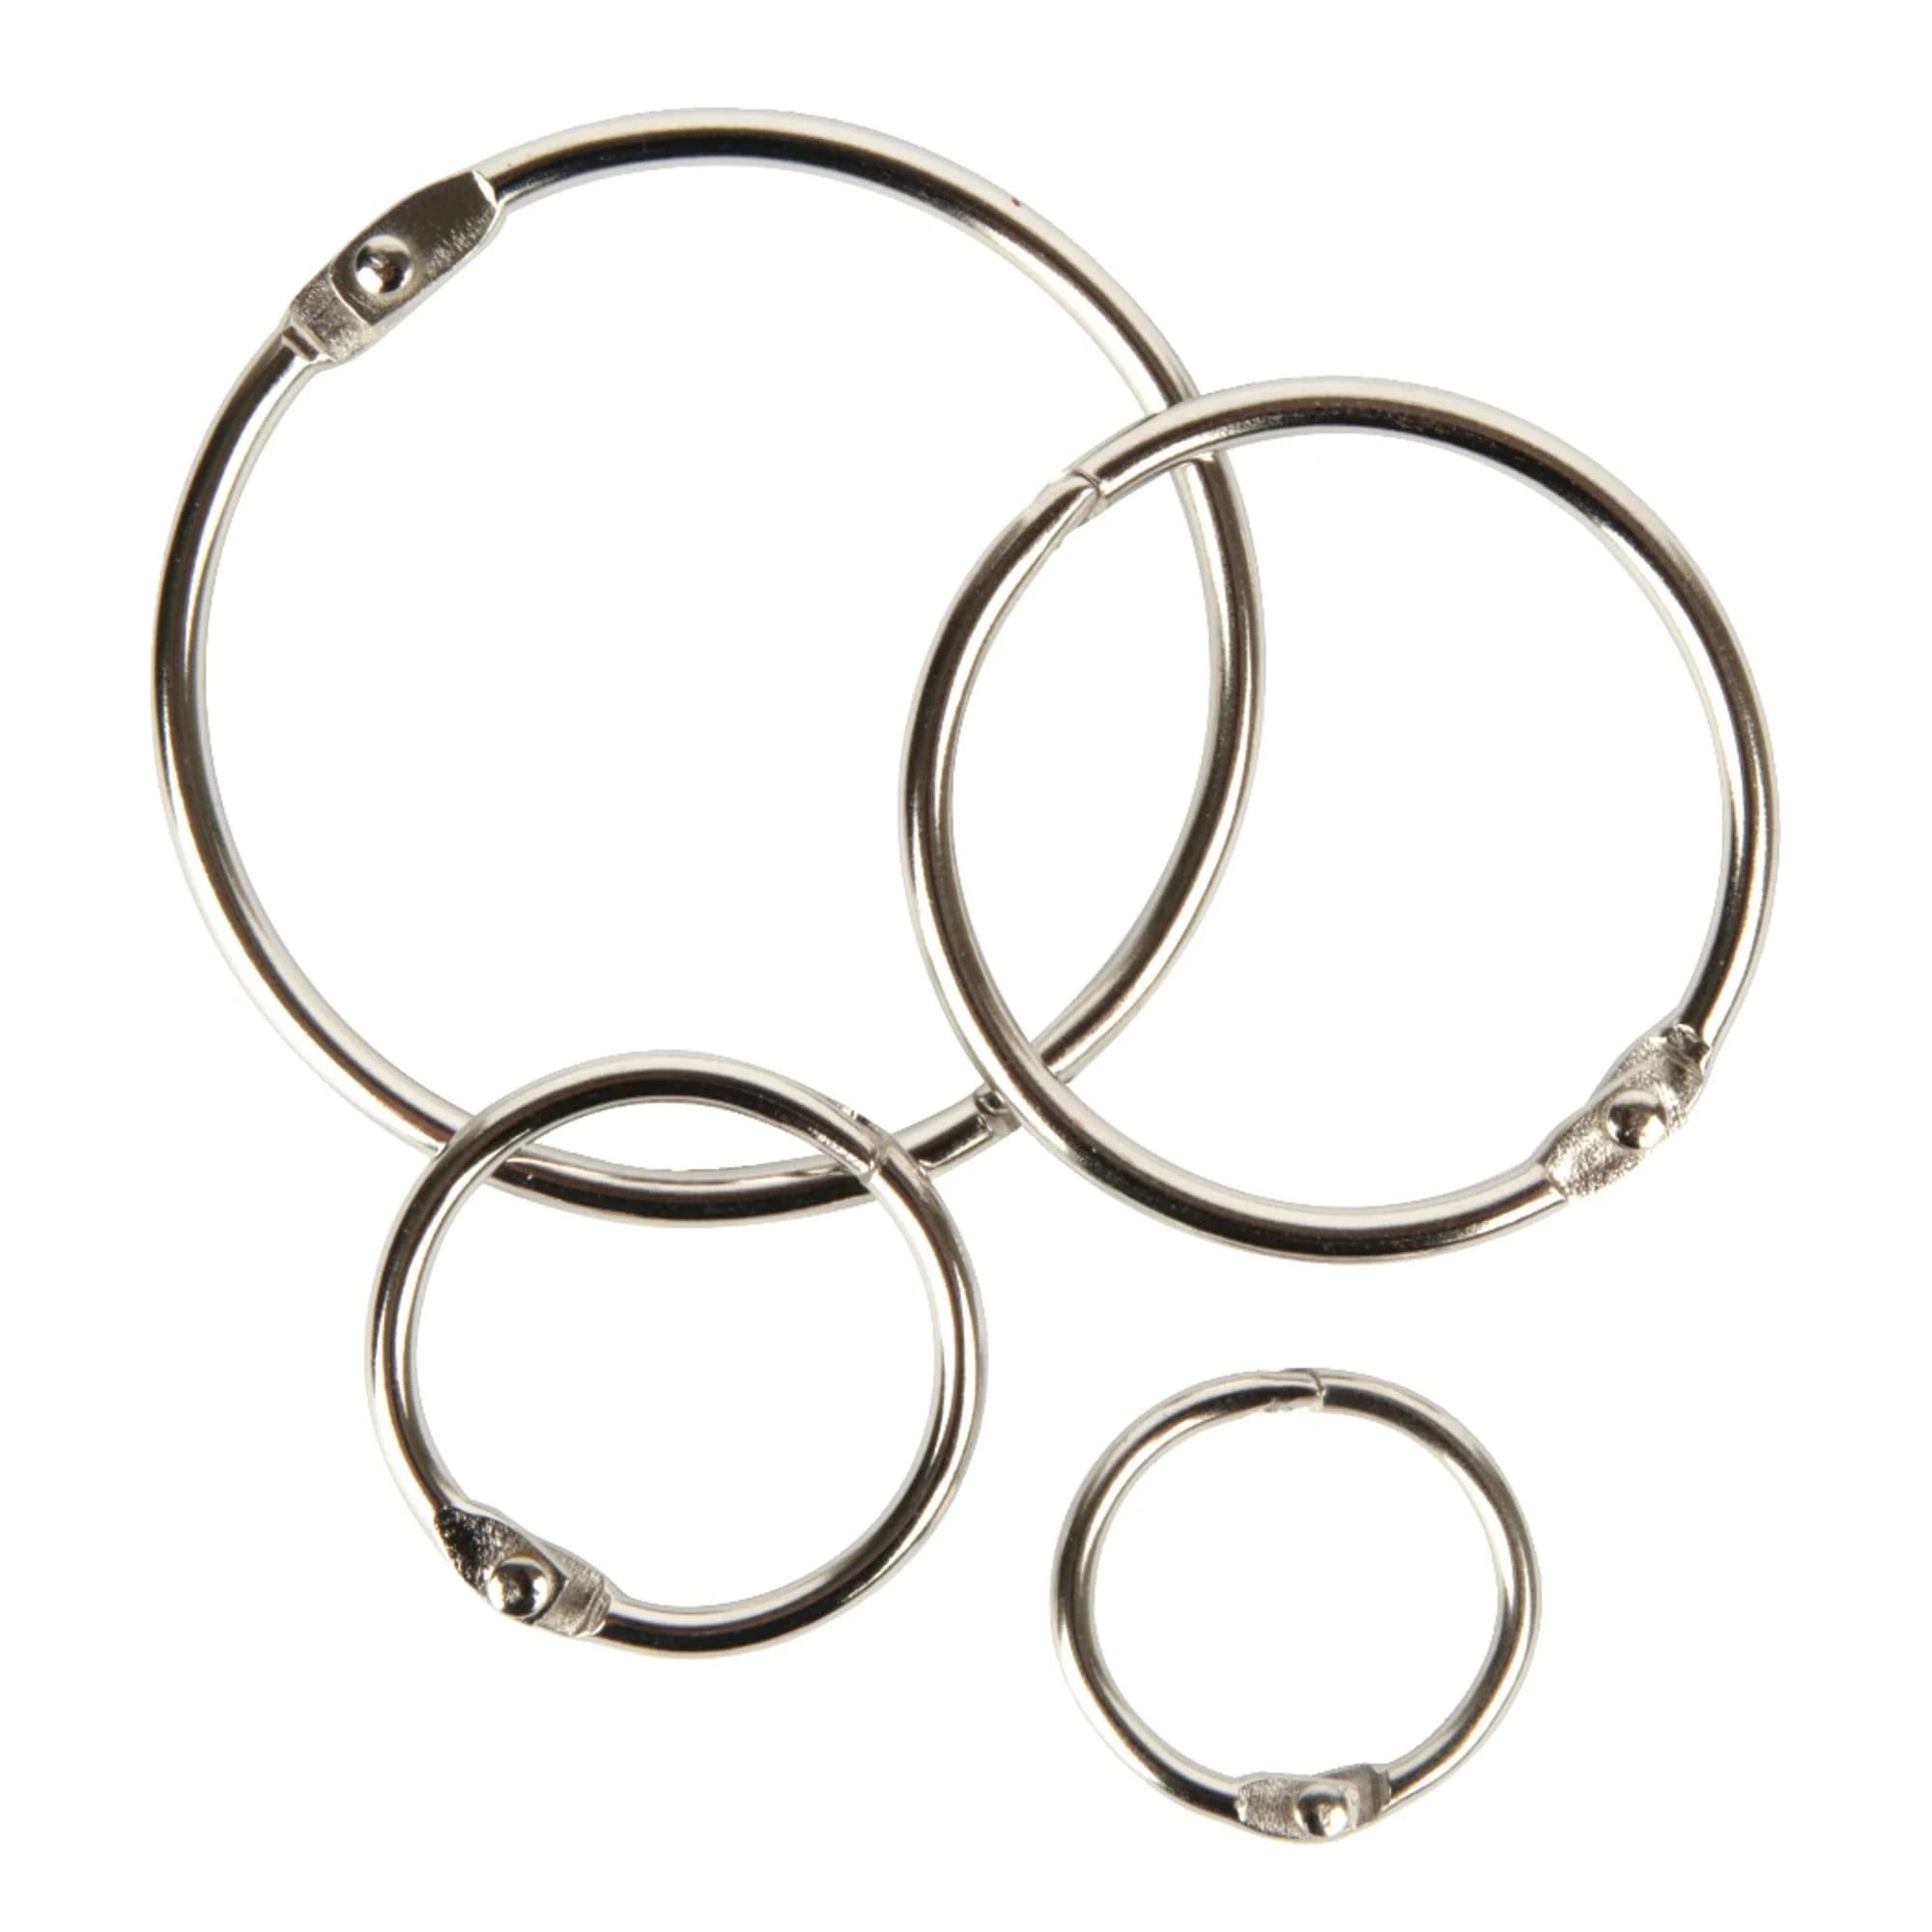 High-Quality Assorted Binder Rings Pack of 20 | Image